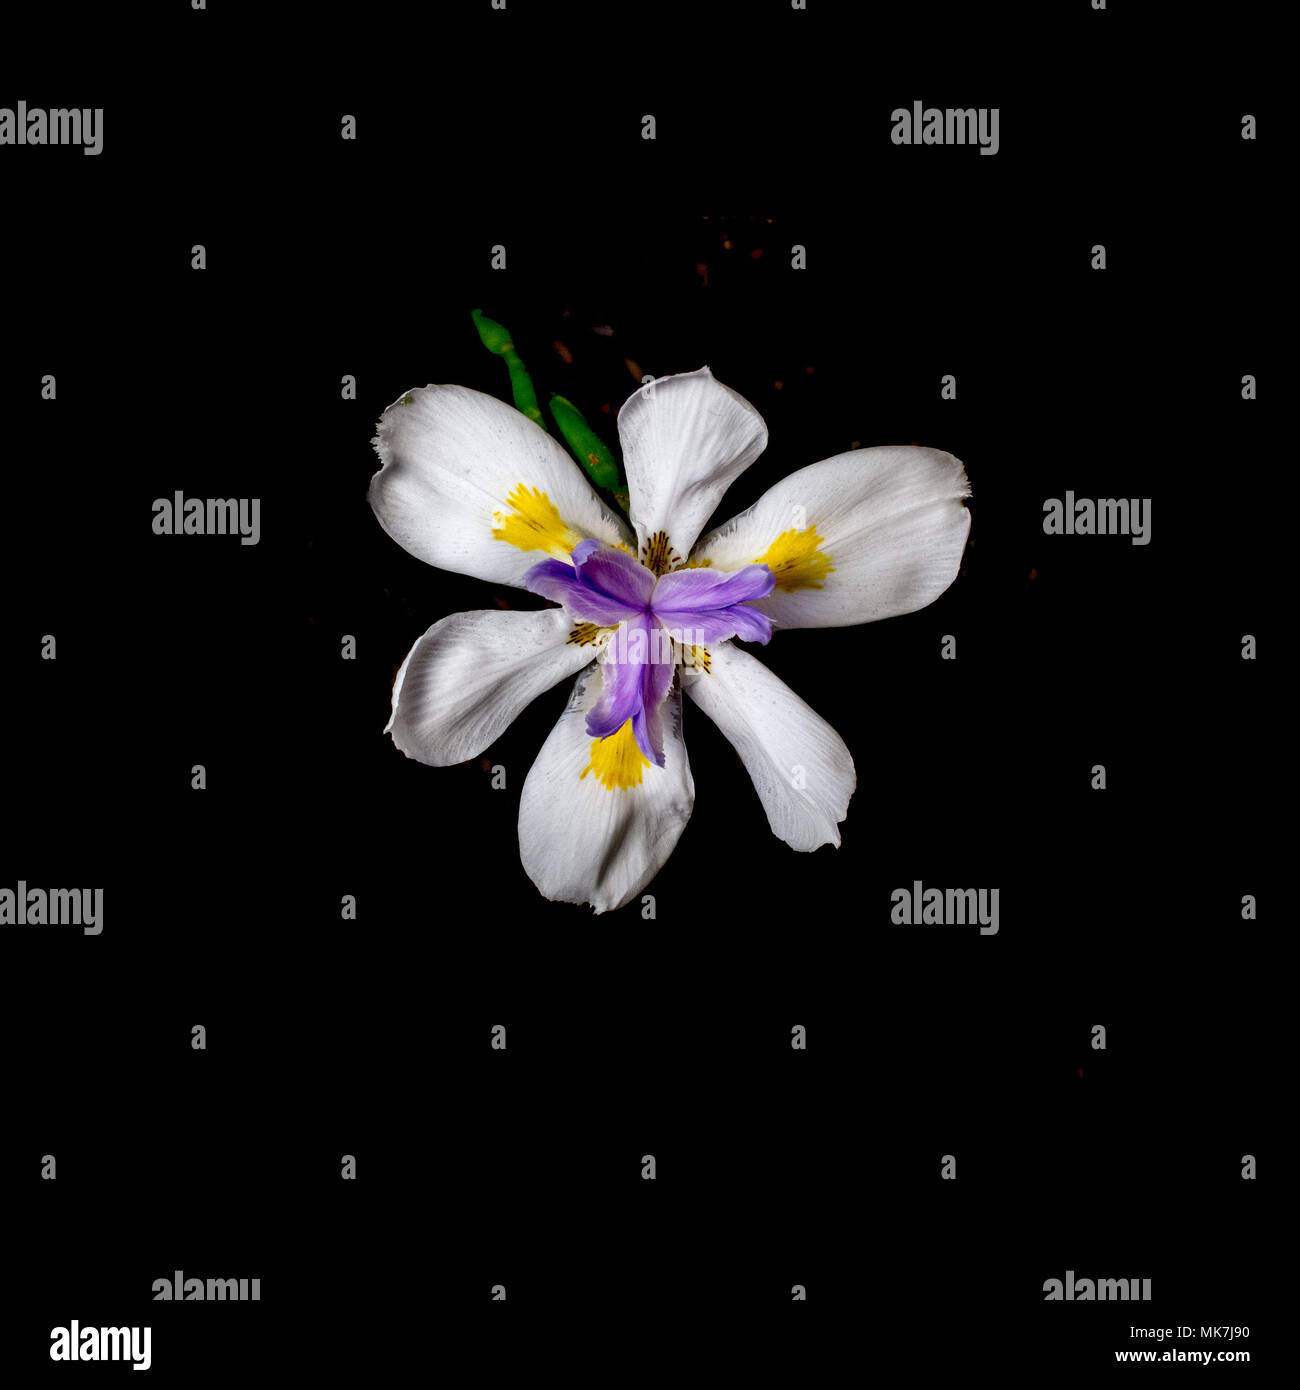 African Iris, Dietes iridioides, on black background, top view. This an ornamental plant in the Iridaceae family the flowers last only one day. Stock Photo